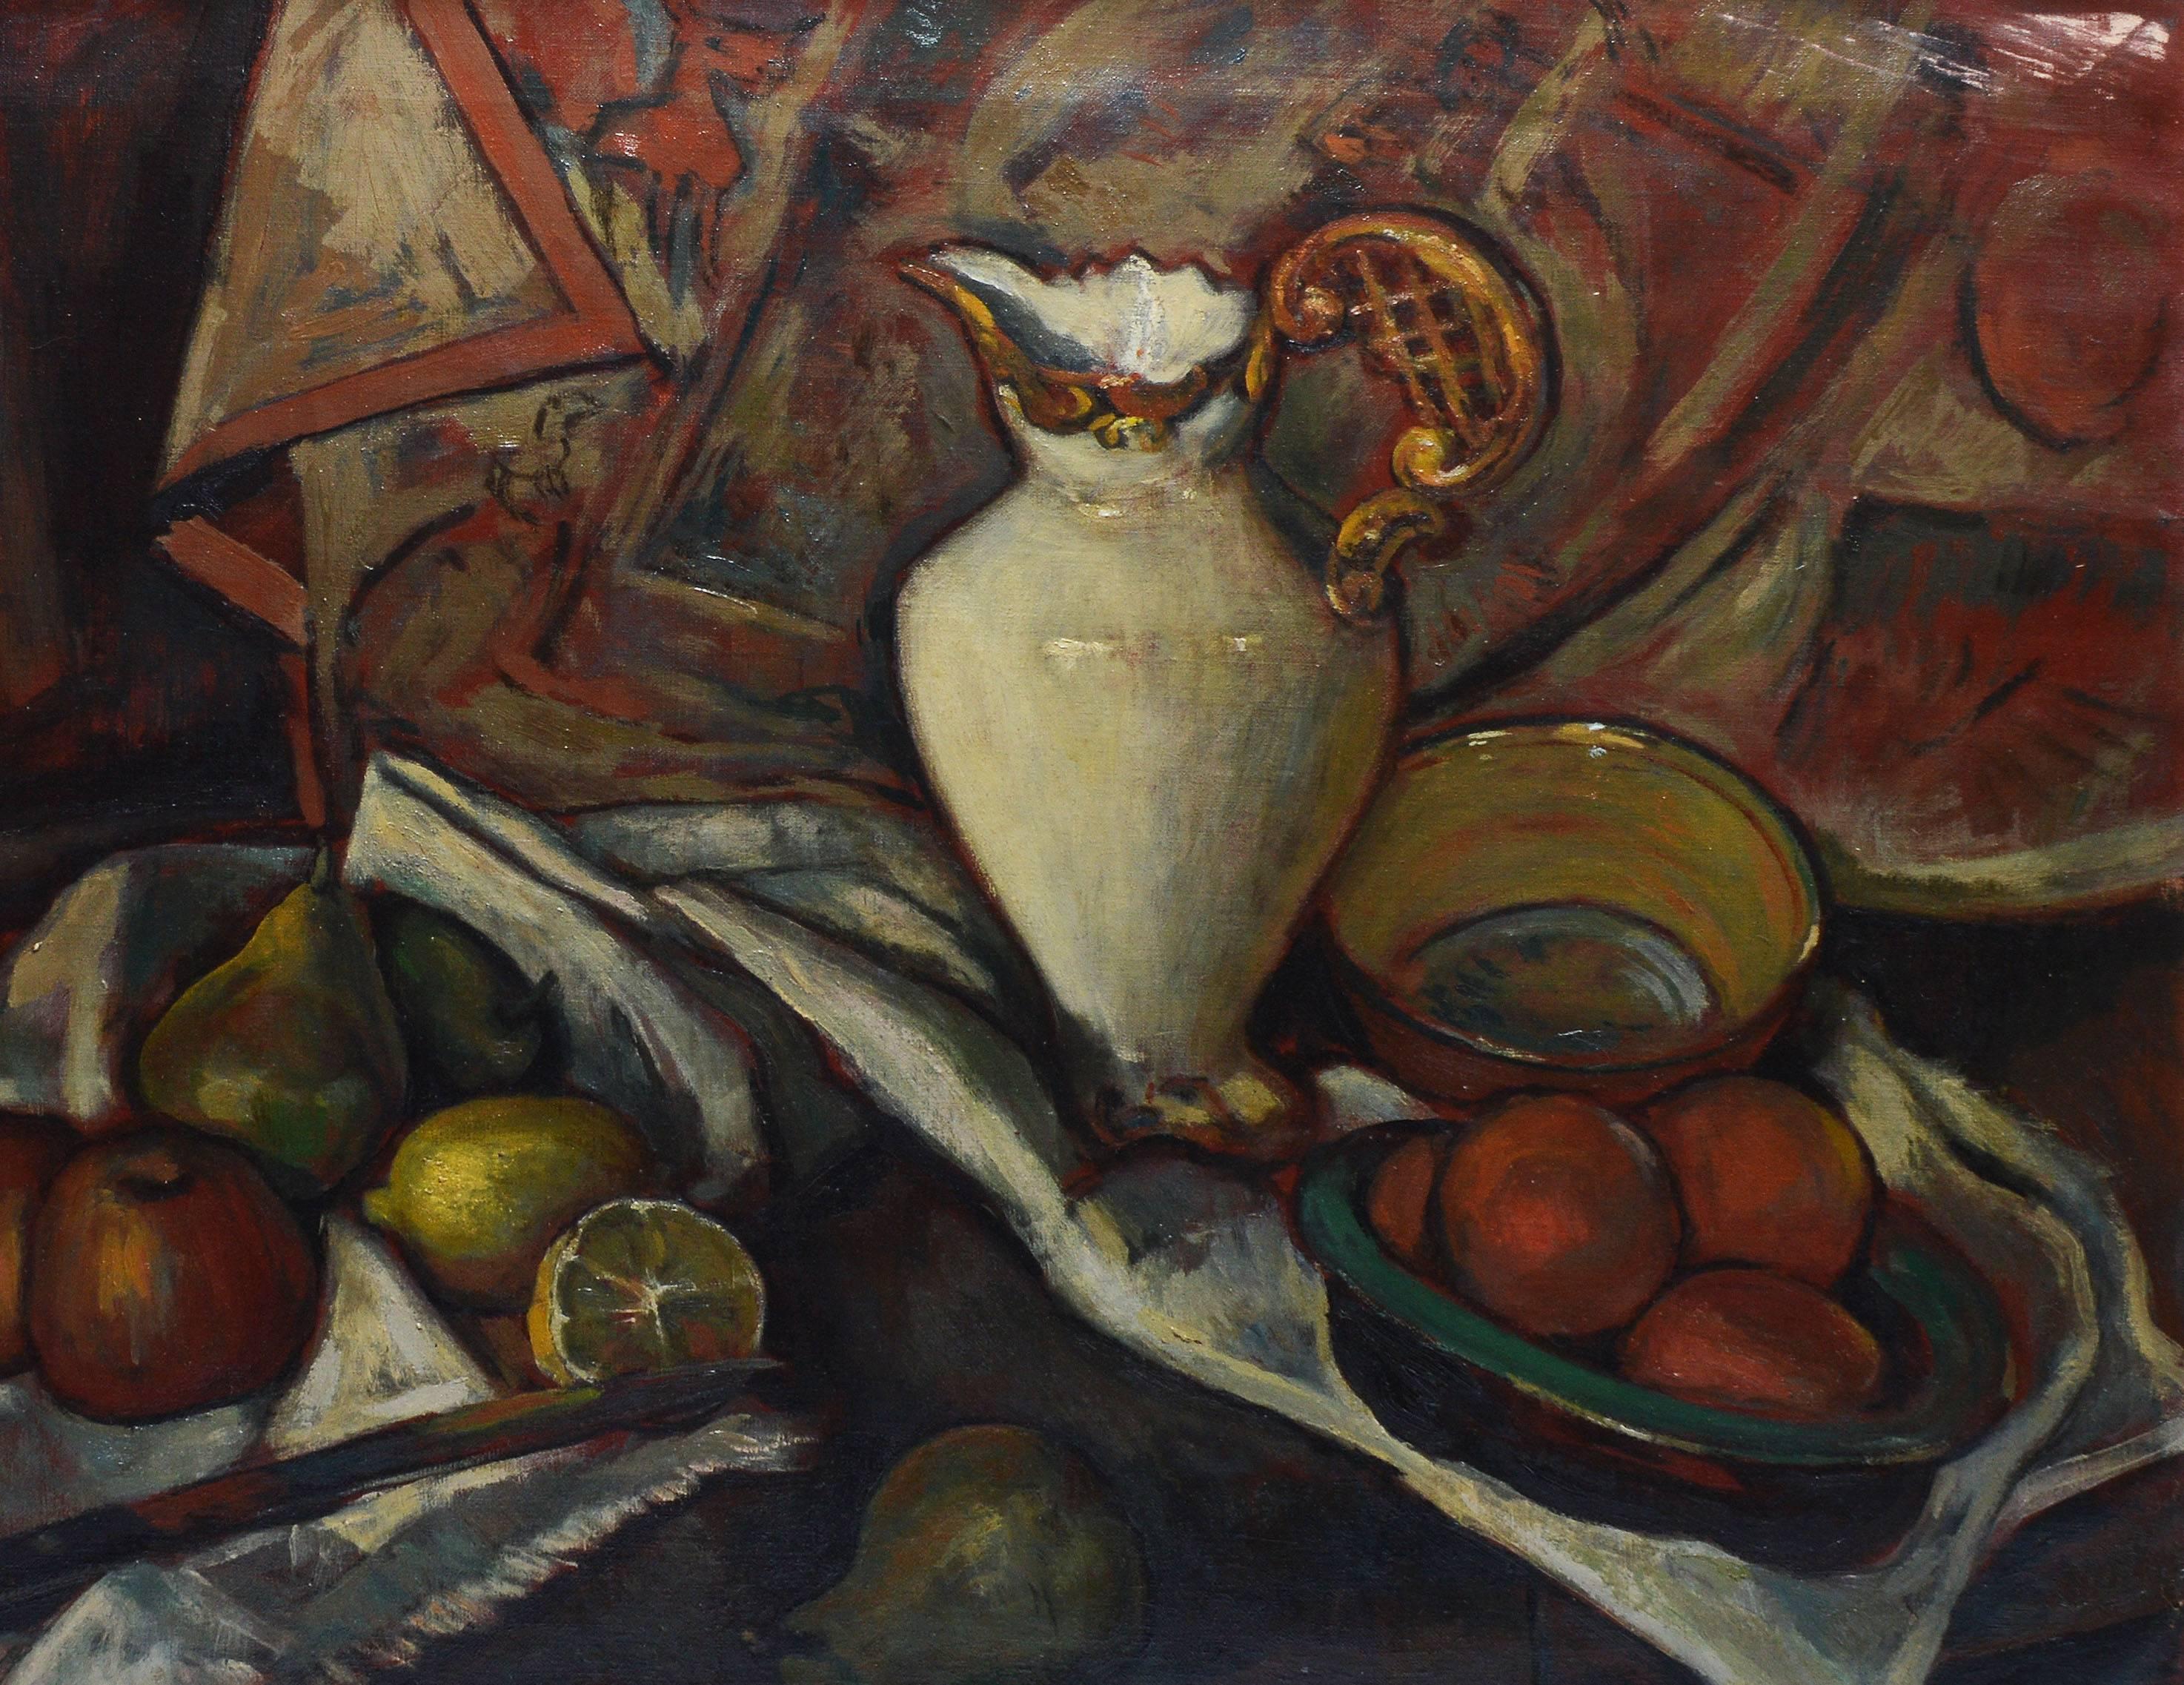 Modernist still life of fruit by Leo Quanchi  (1892 - 1974).  Oil on canvas, circa 1930.  Signed lower right, 